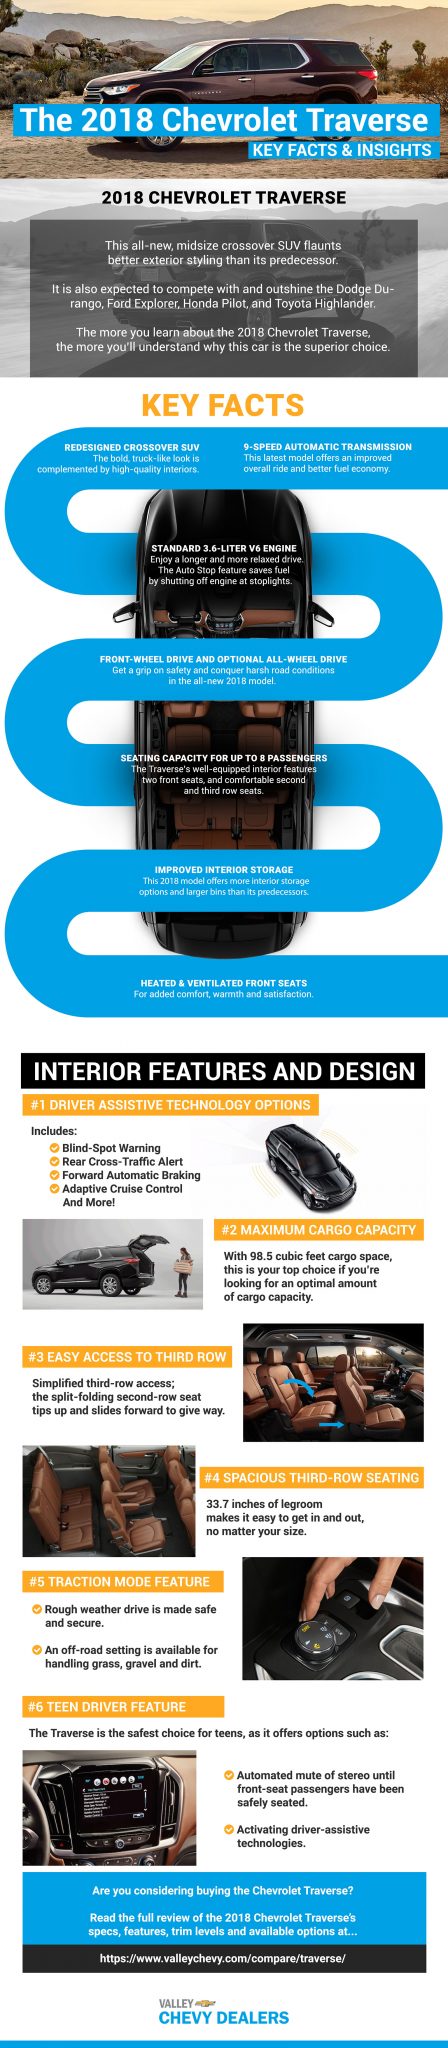 Valley Chevy - 2018 Chevrolet Traverse Infographic